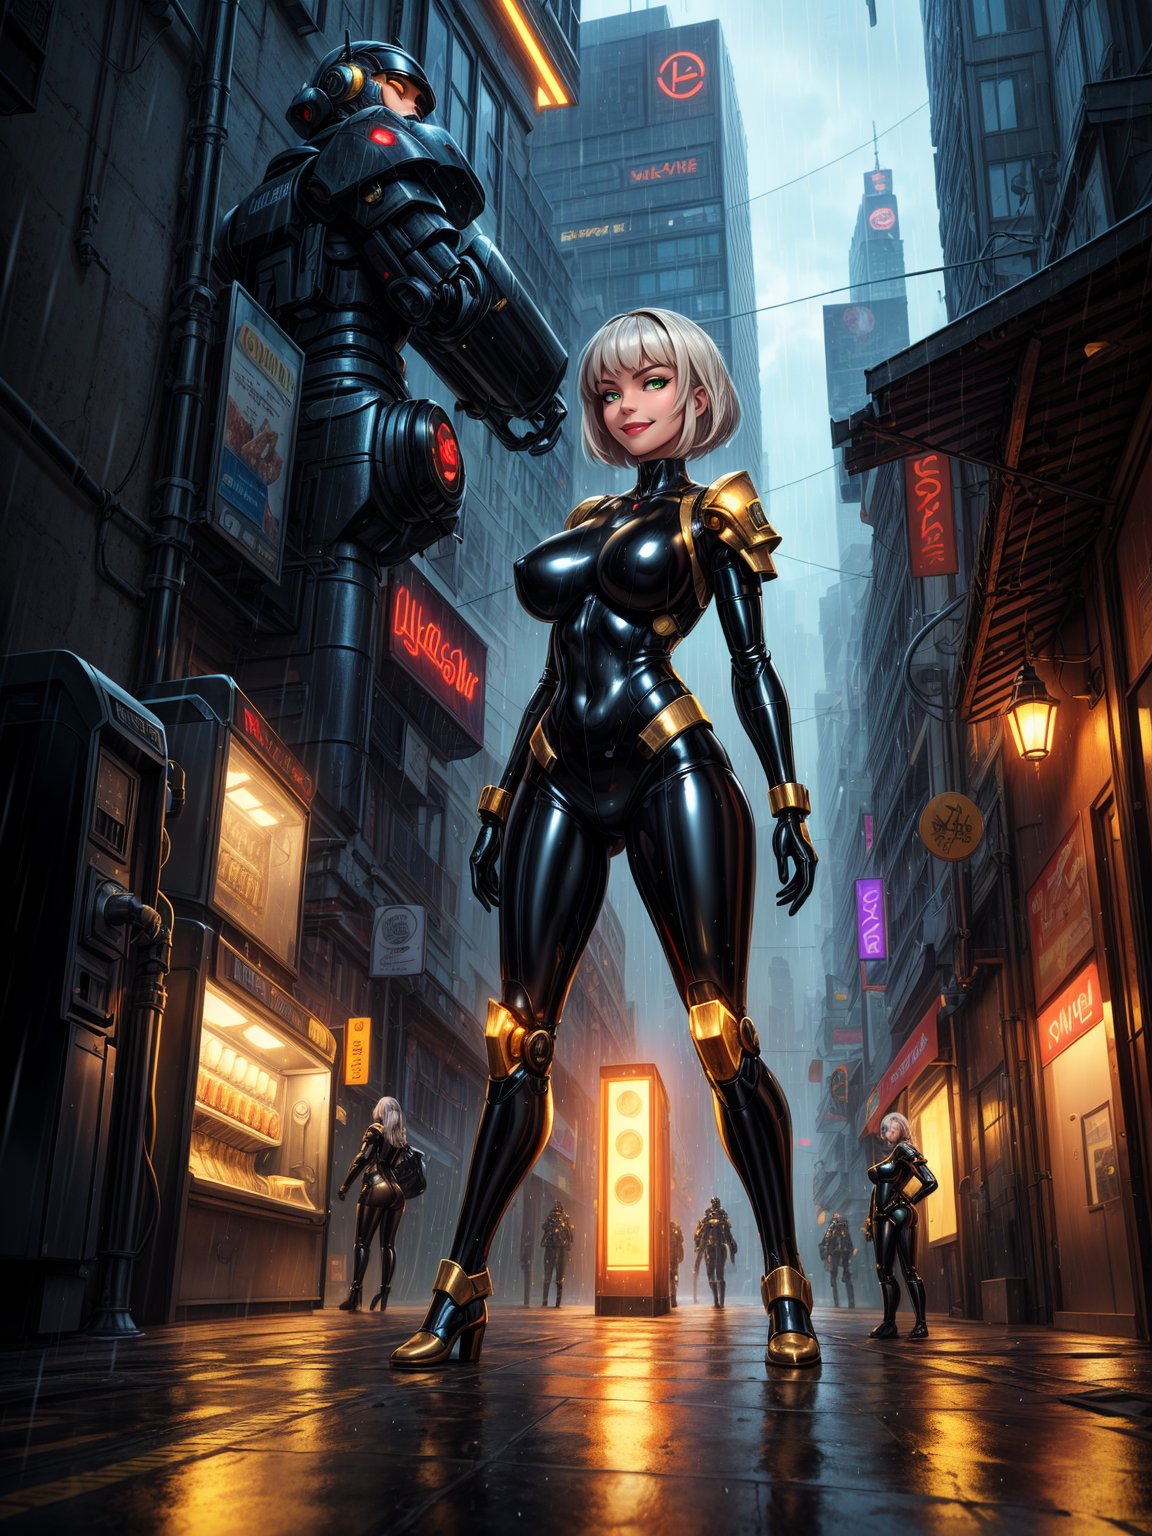 ((1woman)), ((wearing futuristic warrior clothing made of black latex, gold metals attached, extremely tight and short on the body)), ((flat silver hair, hair with bangs in front of the eye)), ((gigantic breasts)), ((staring at the viewer)), (((doing action position, leaning against an object))), ((in a futuristic city, giant robots, lampposts, raining hard, soda machines,  multiple people with different ethnicities)), ((((full body)))), 16k, UHD, better quality, better resolution, better detail, light and shadow effects